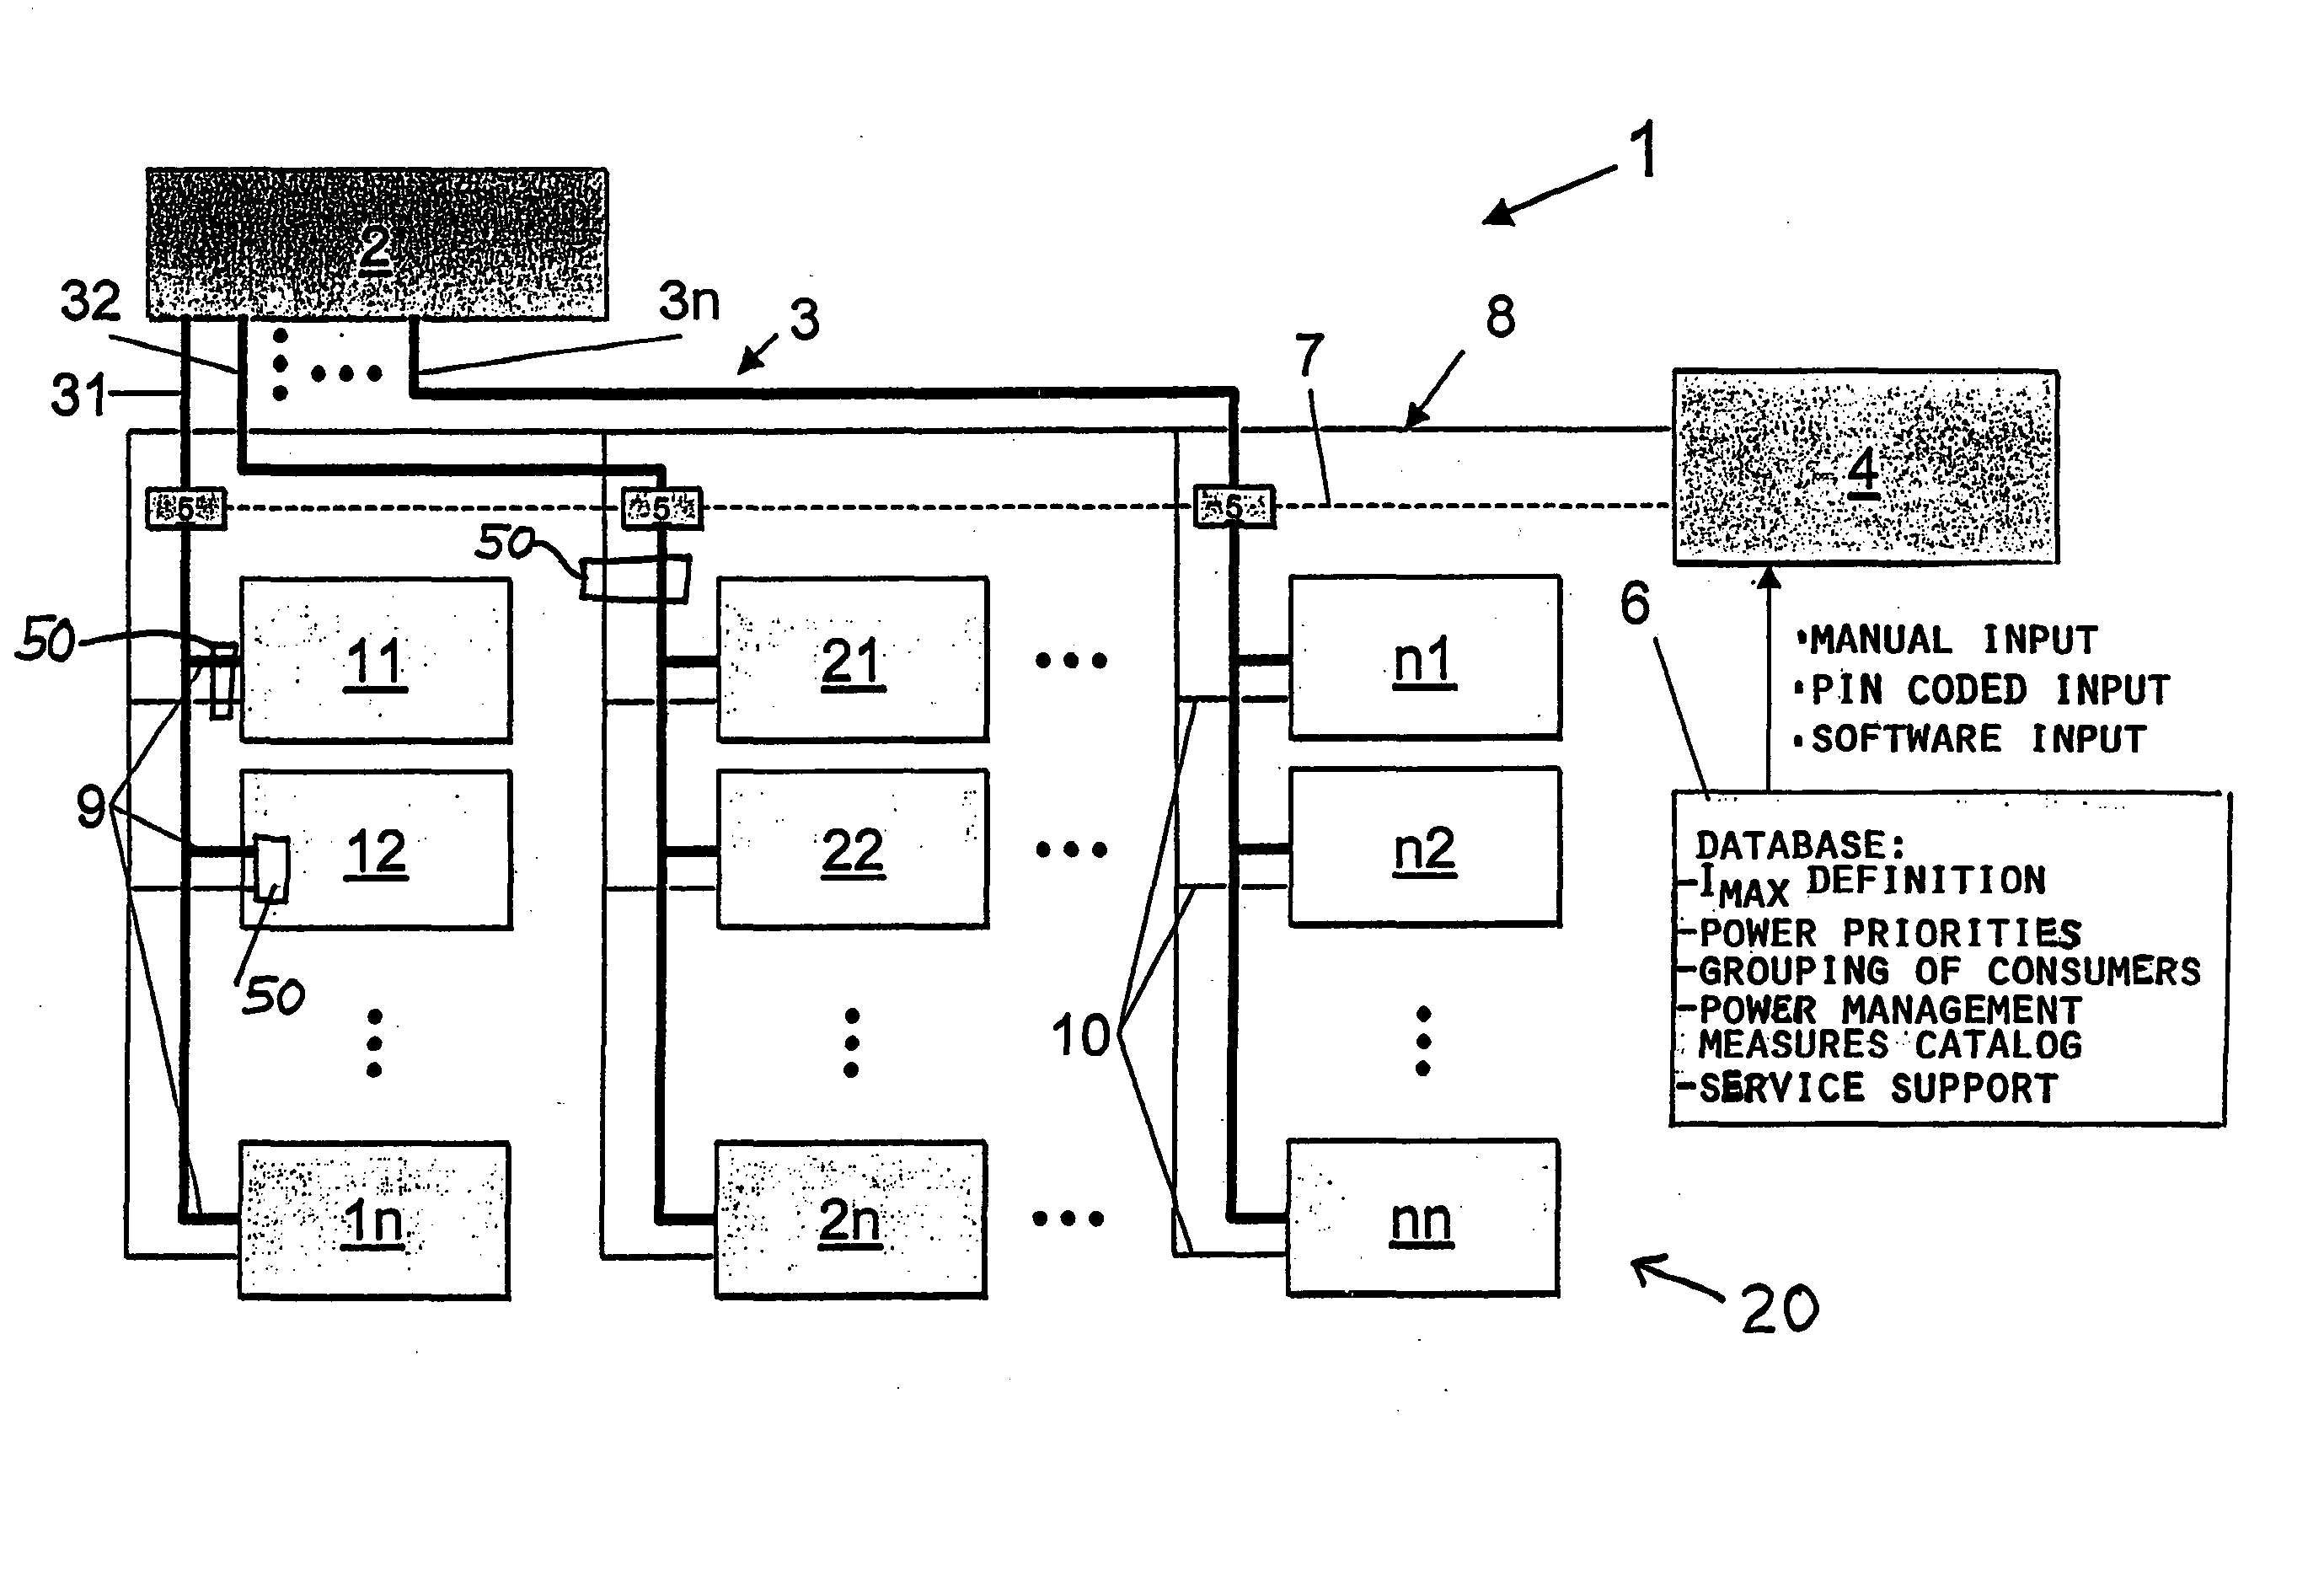 Intelligent power distribution management for an on-board galley of a transport vehicle such as an aircraft